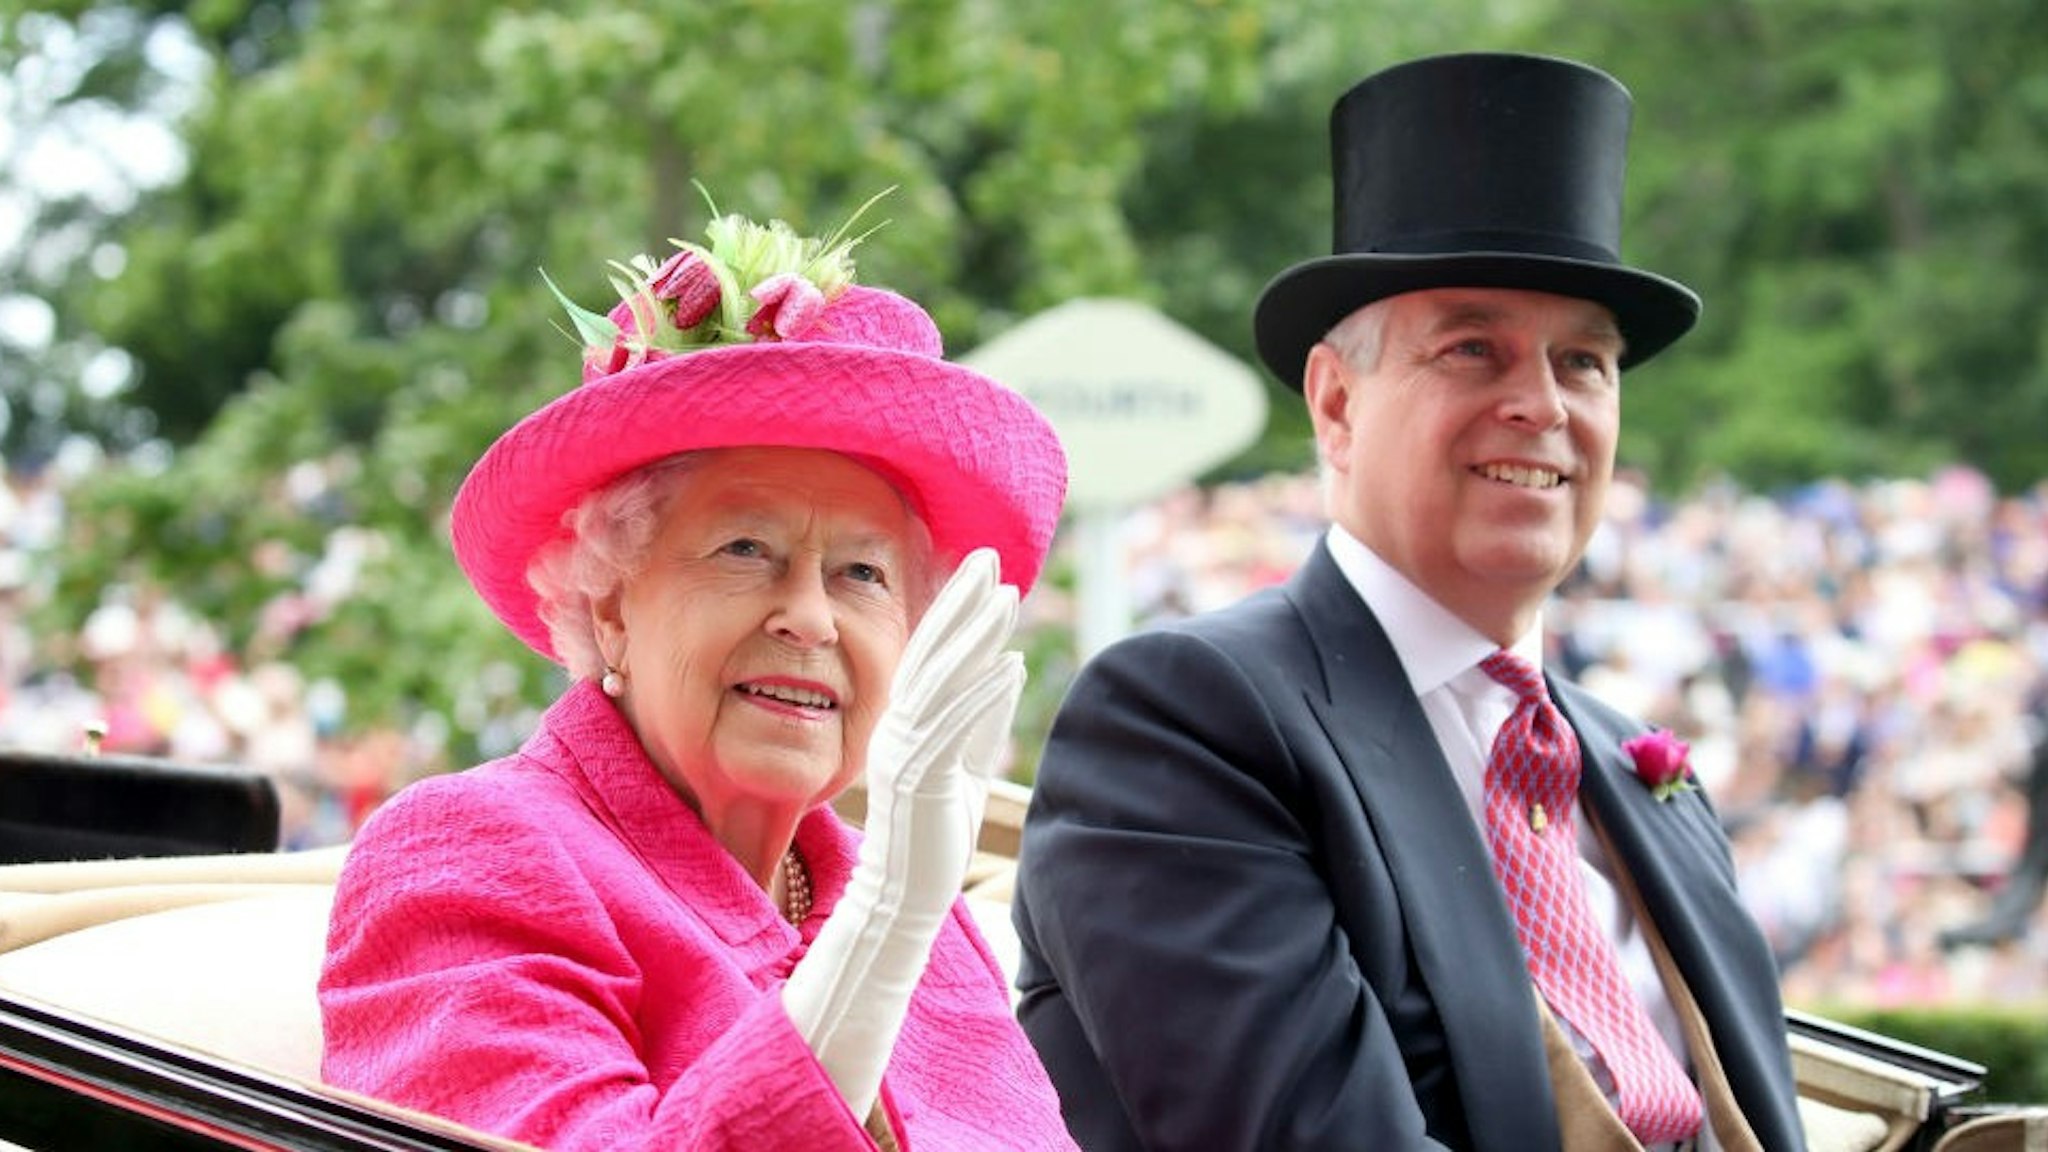 ASCOT, ENGLAND - JUNE 22: Queen Elizabeth II and Prince Andrew, Duke of York attend Royal Ascot 2017 at Ascot Racecourse on June 22, 2017 in Ascot, England.